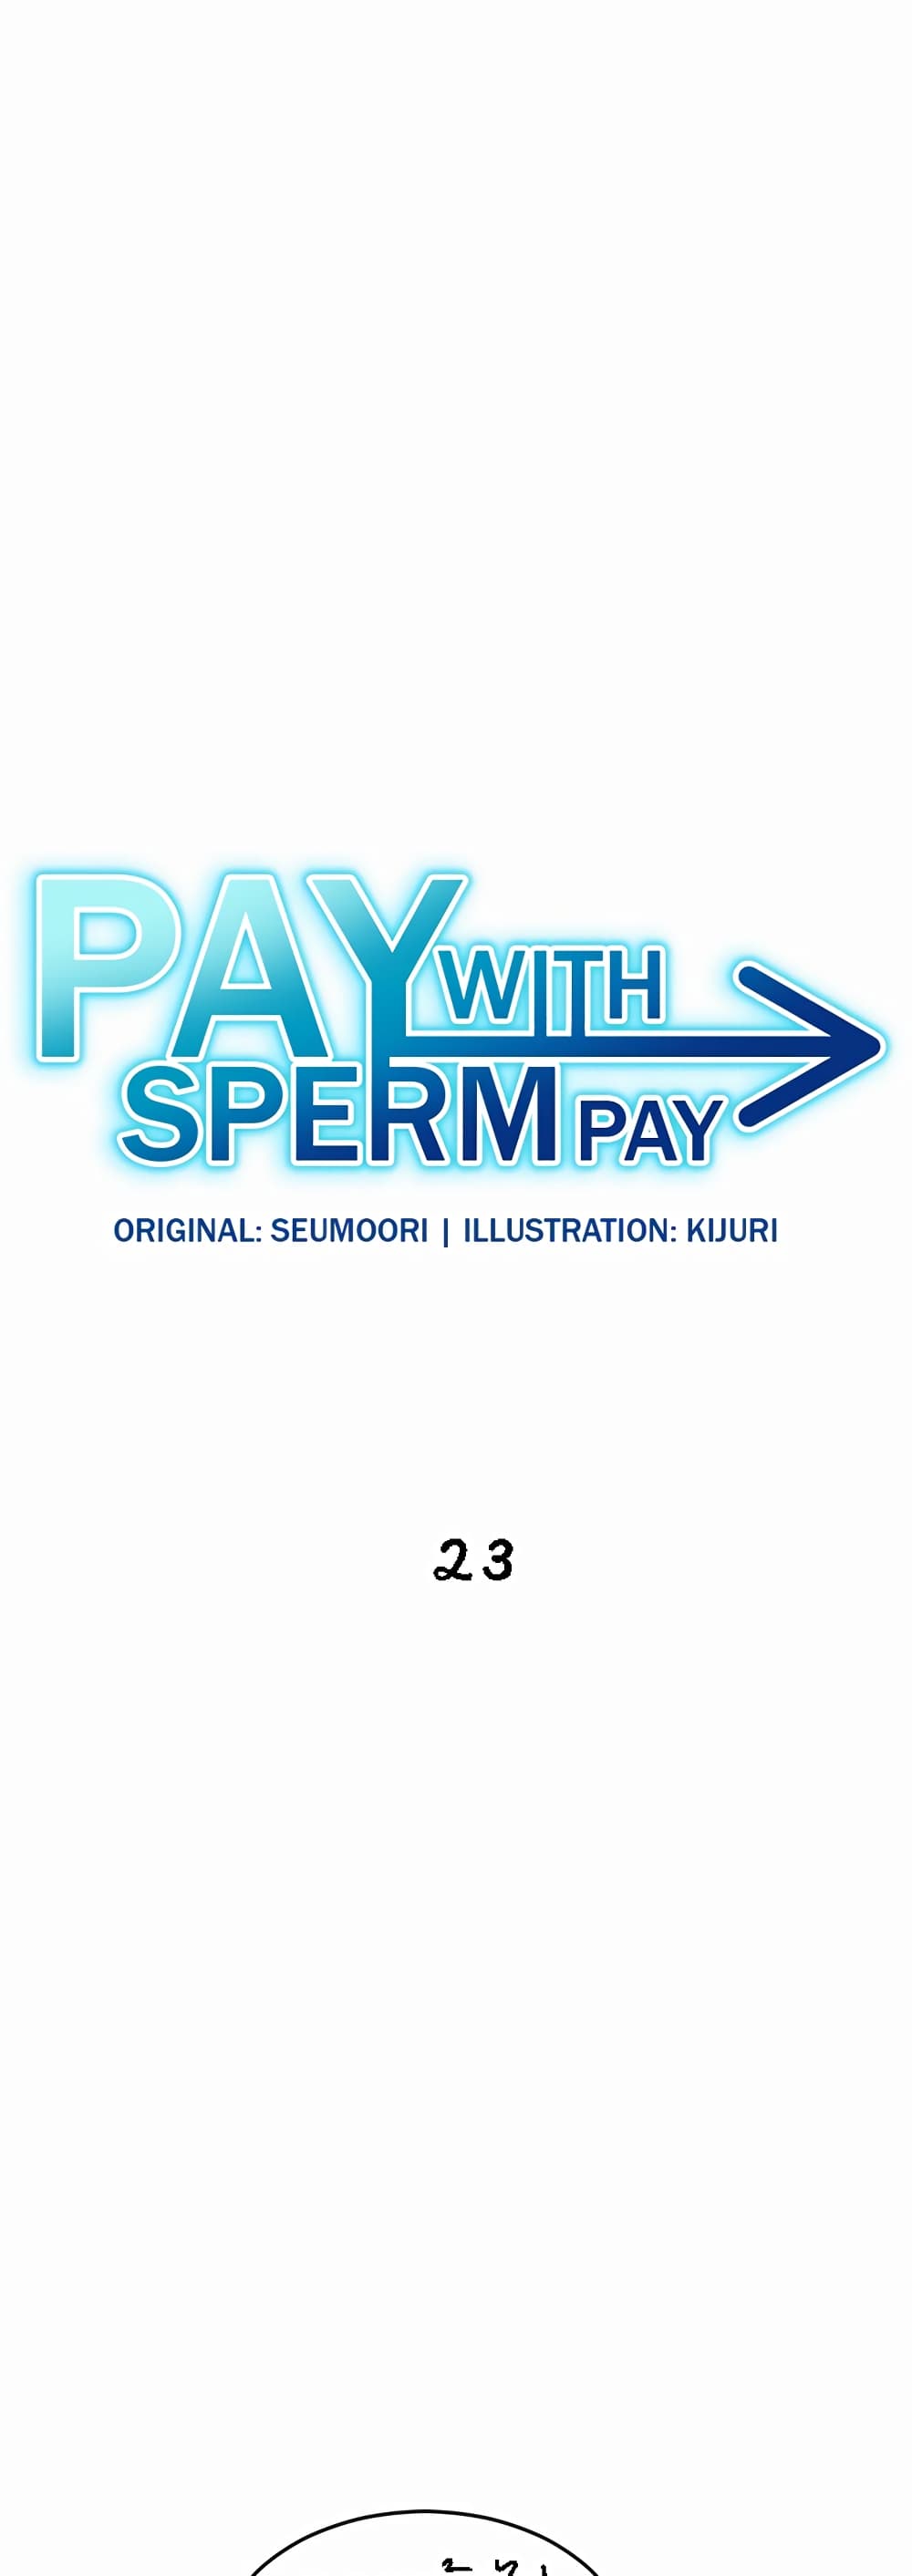 Pay with Sperm Pay 23-23